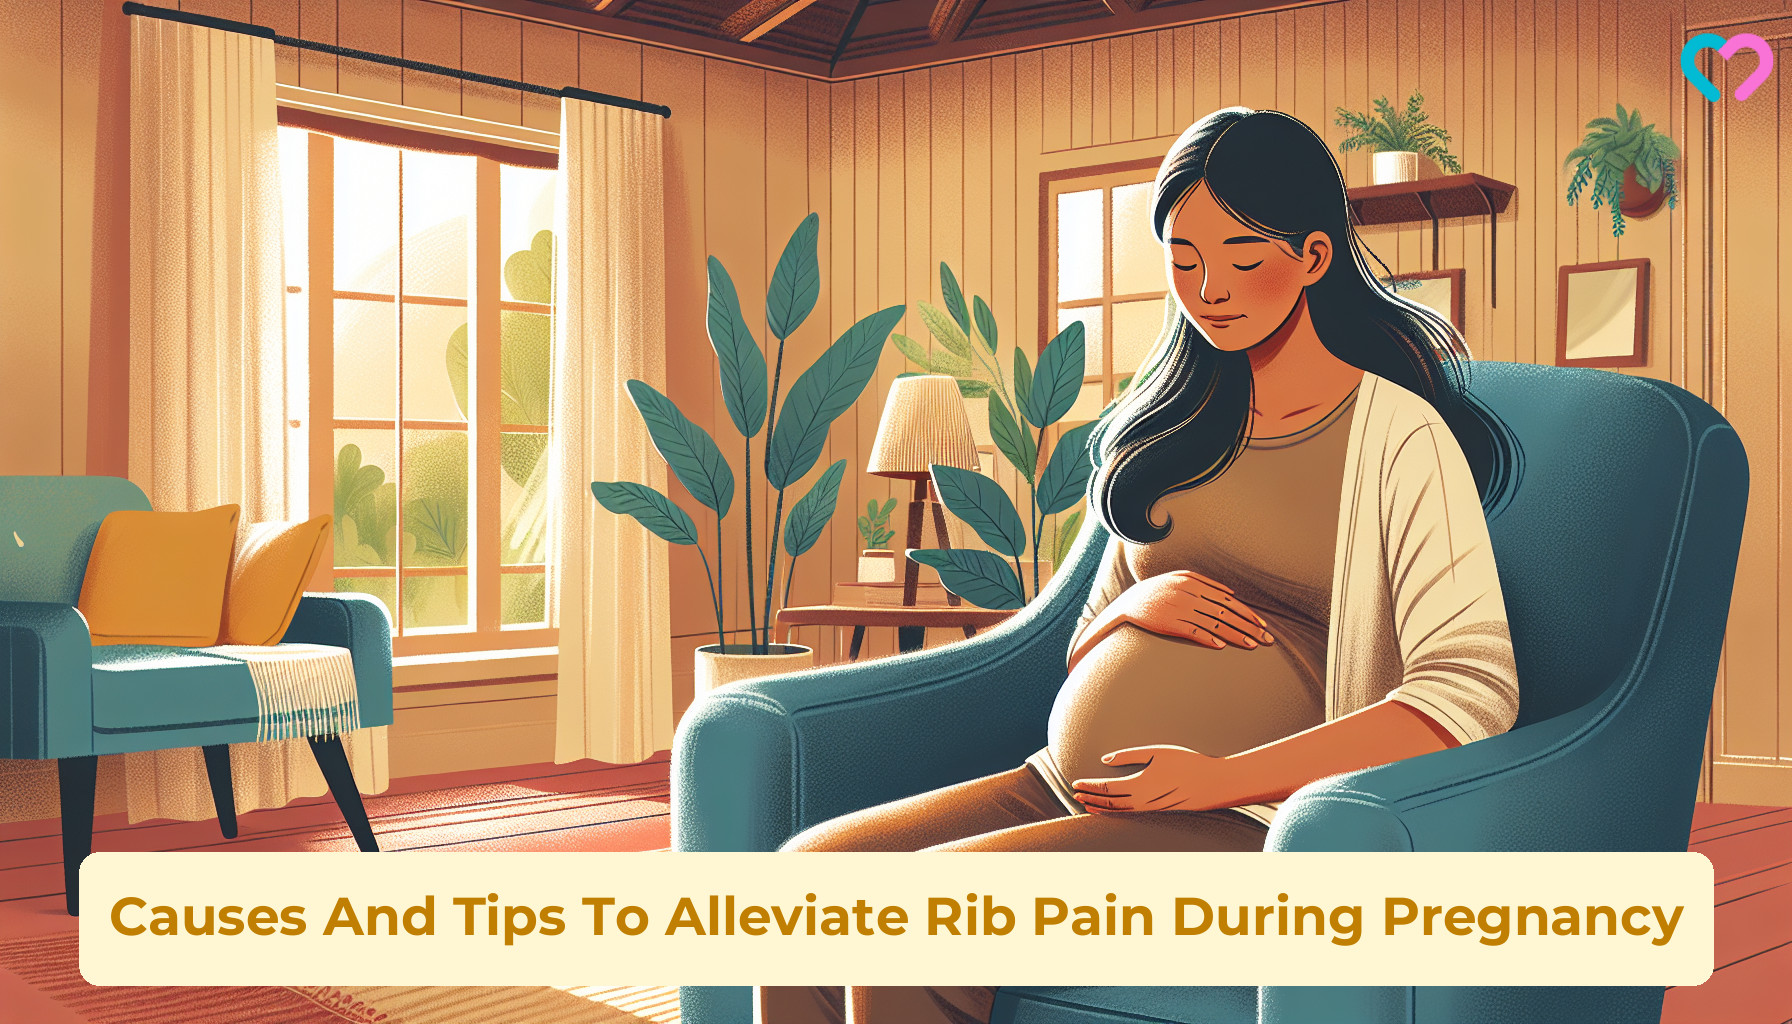 6 Causes And 8 Tips To Alleviate Rib Pain During Pregnancy